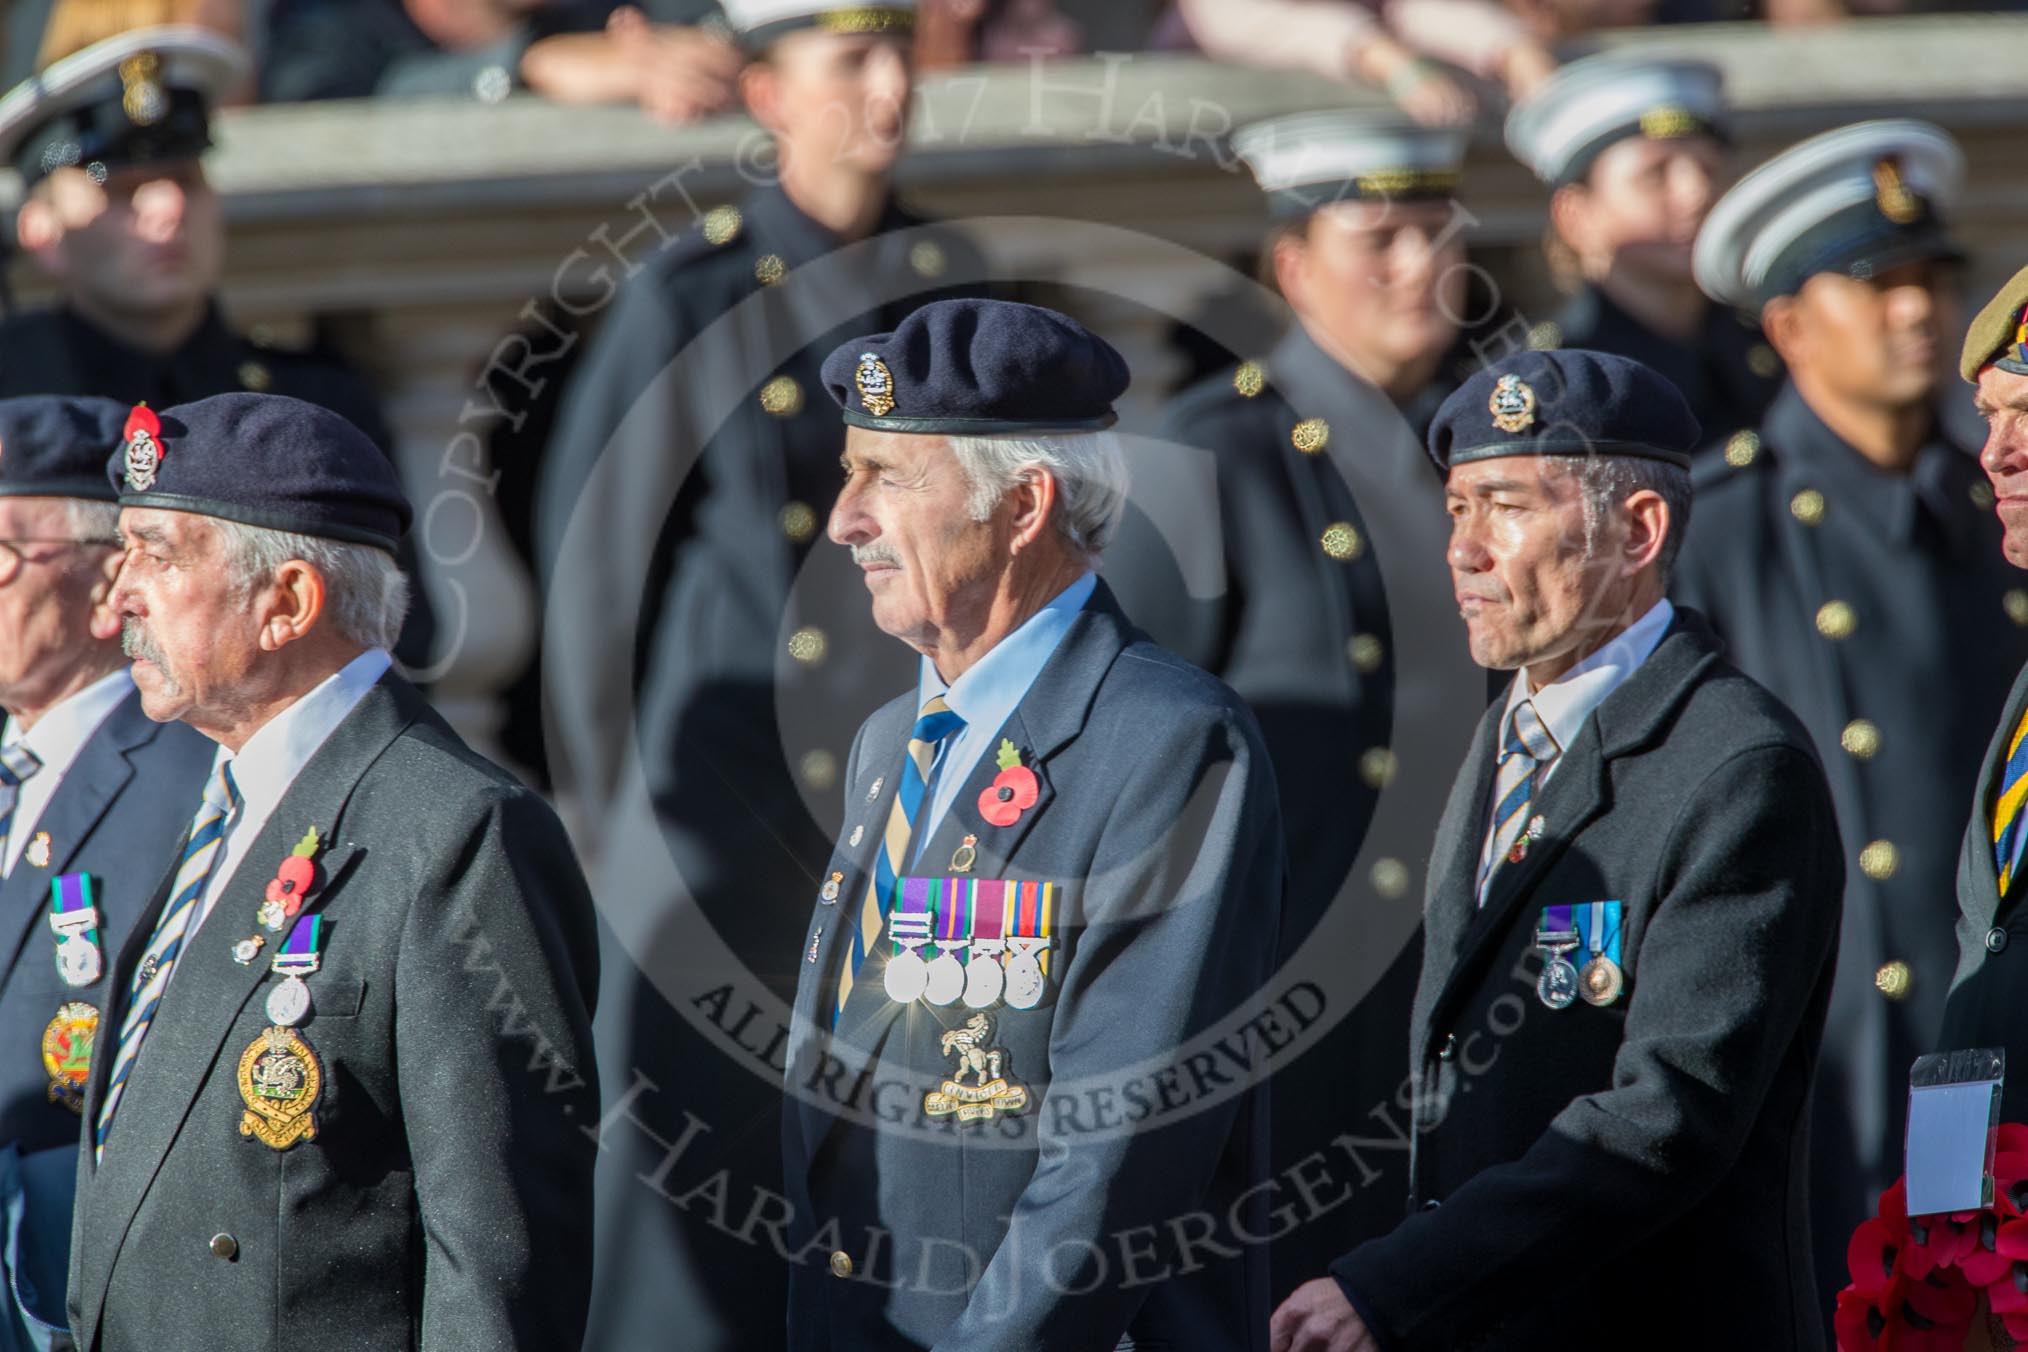 The Princess of Wales's Royal Regiment (Group A26, 60 members) during the Royal British Legion March Past on Remembrance Sunday at the Cenotaph, Whitehall, Westminster, London, 11 November 2018, 12:00.